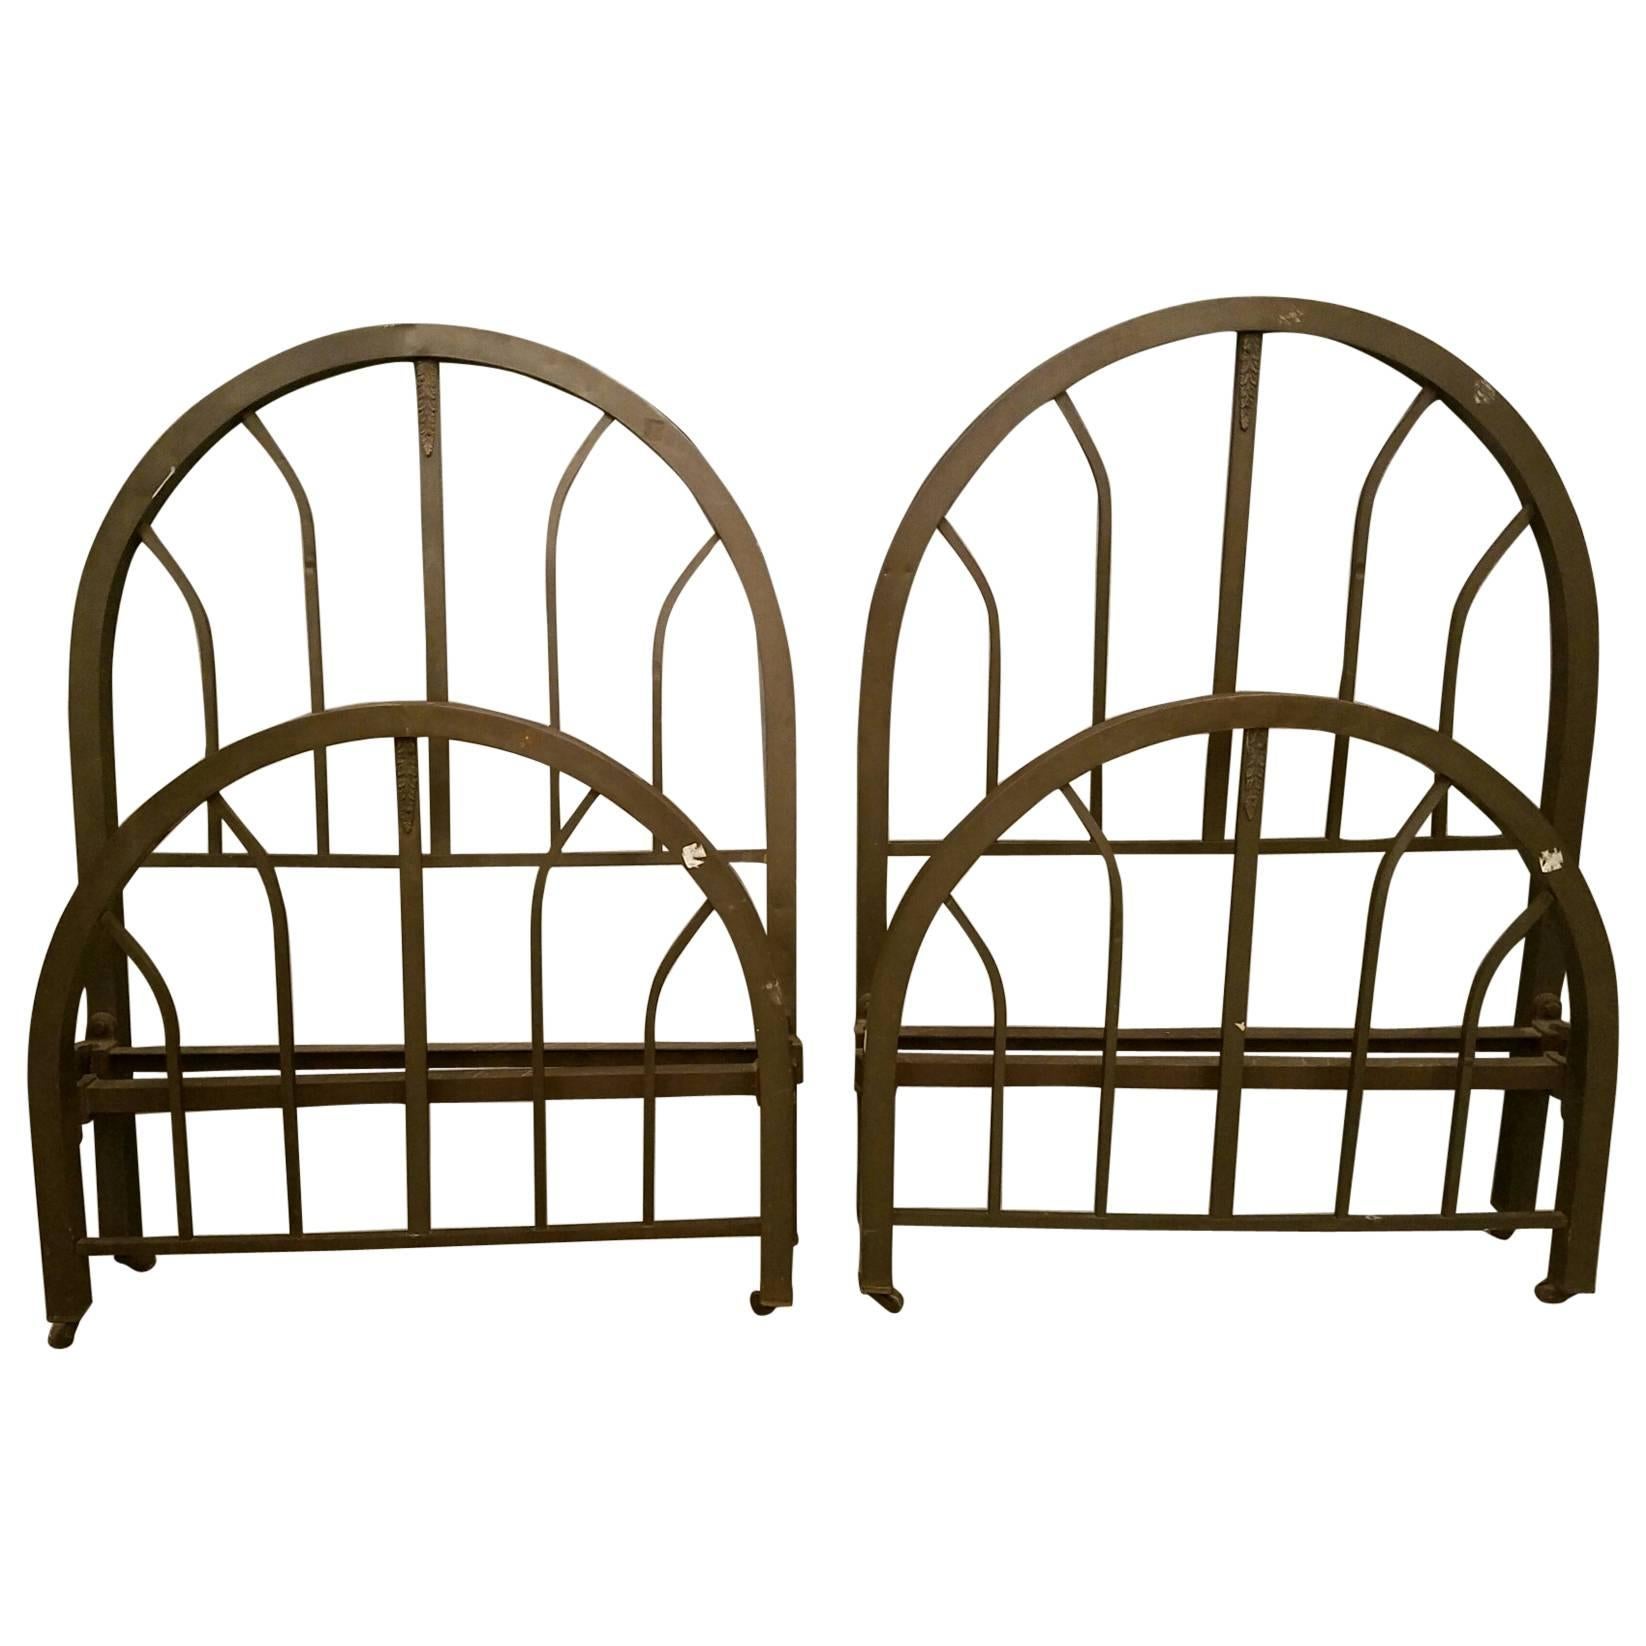 Pair of Antique Brass Single Beds For Sale